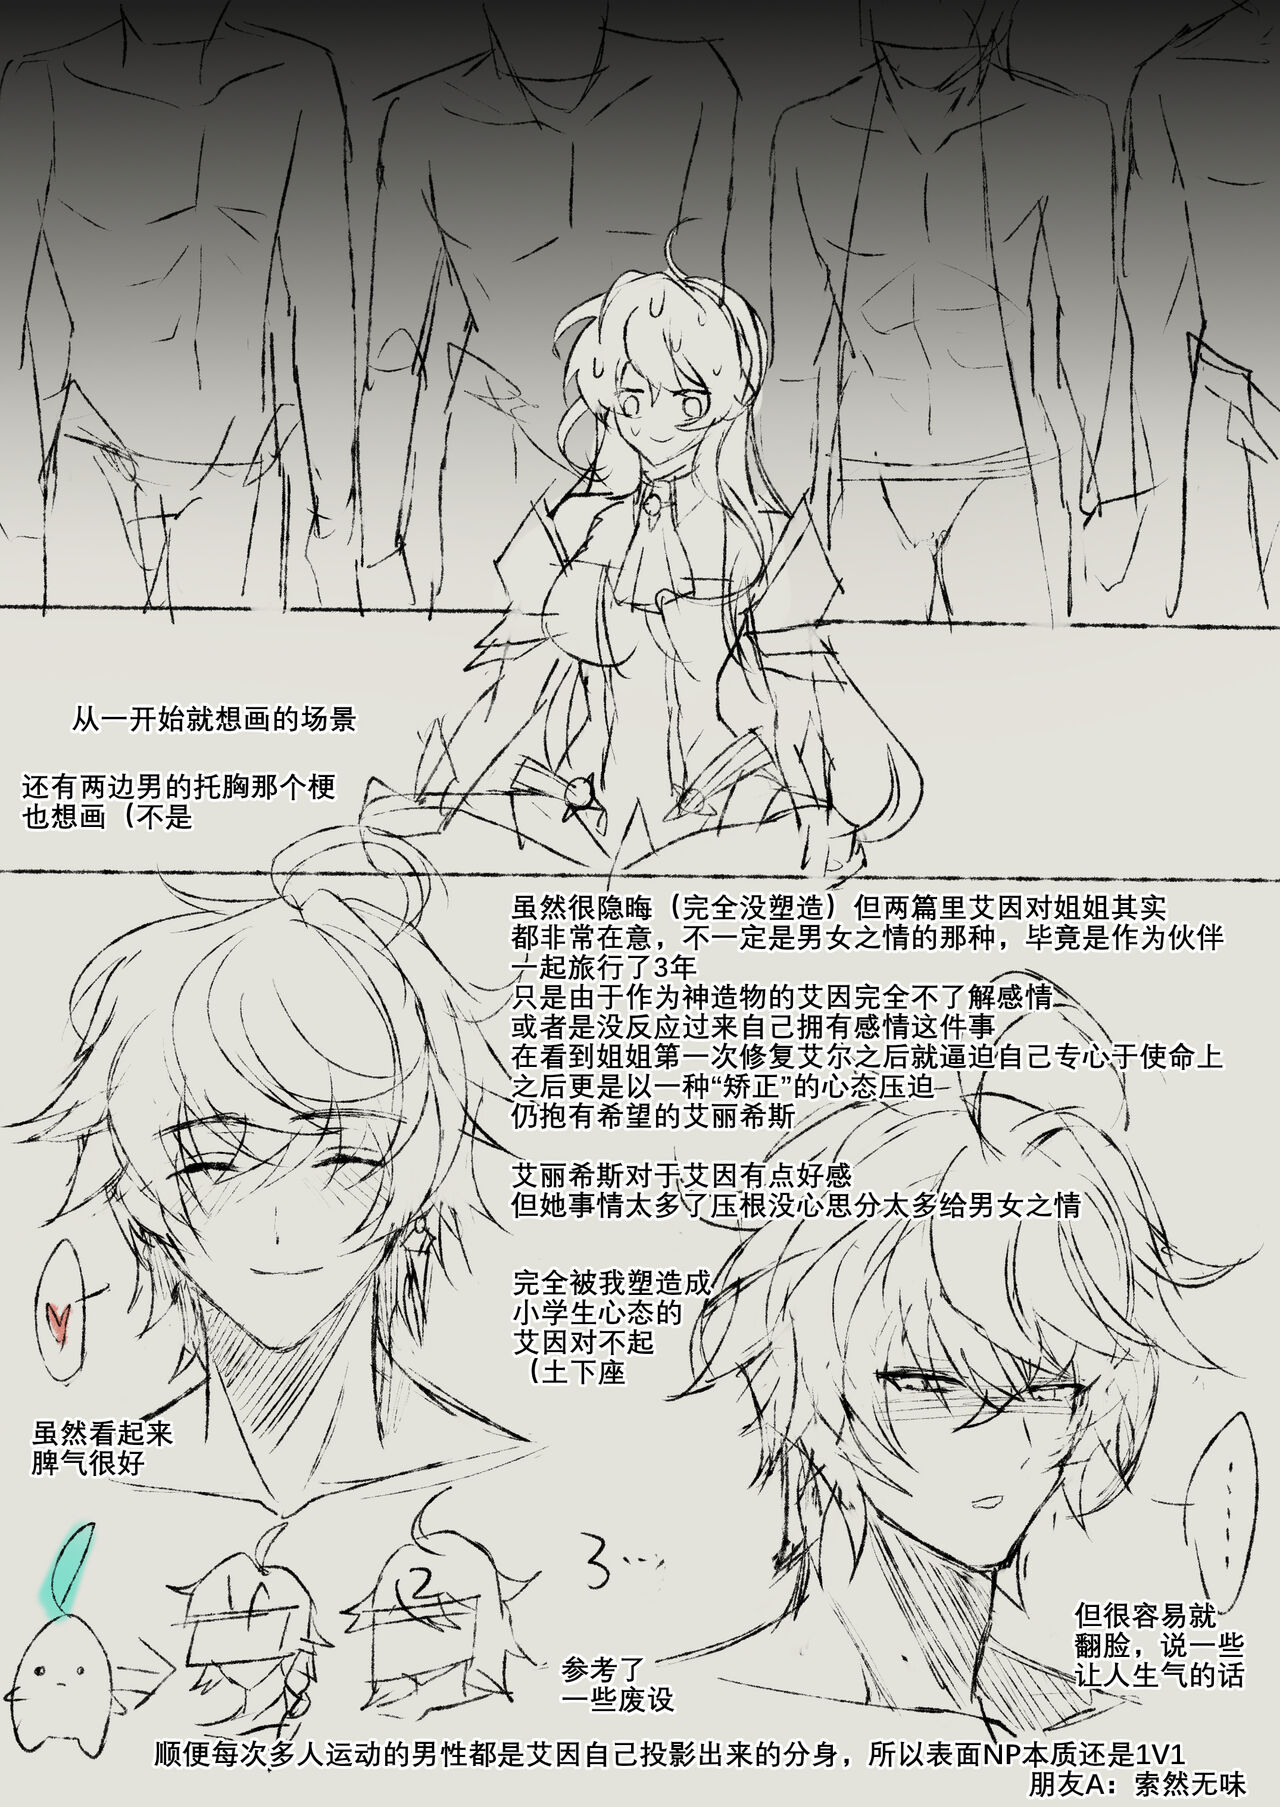 [Been] The illusion of lies(2) (Elsword) [Chinese] [Been] The illusion of lies（2） (エルソード) [中国語]